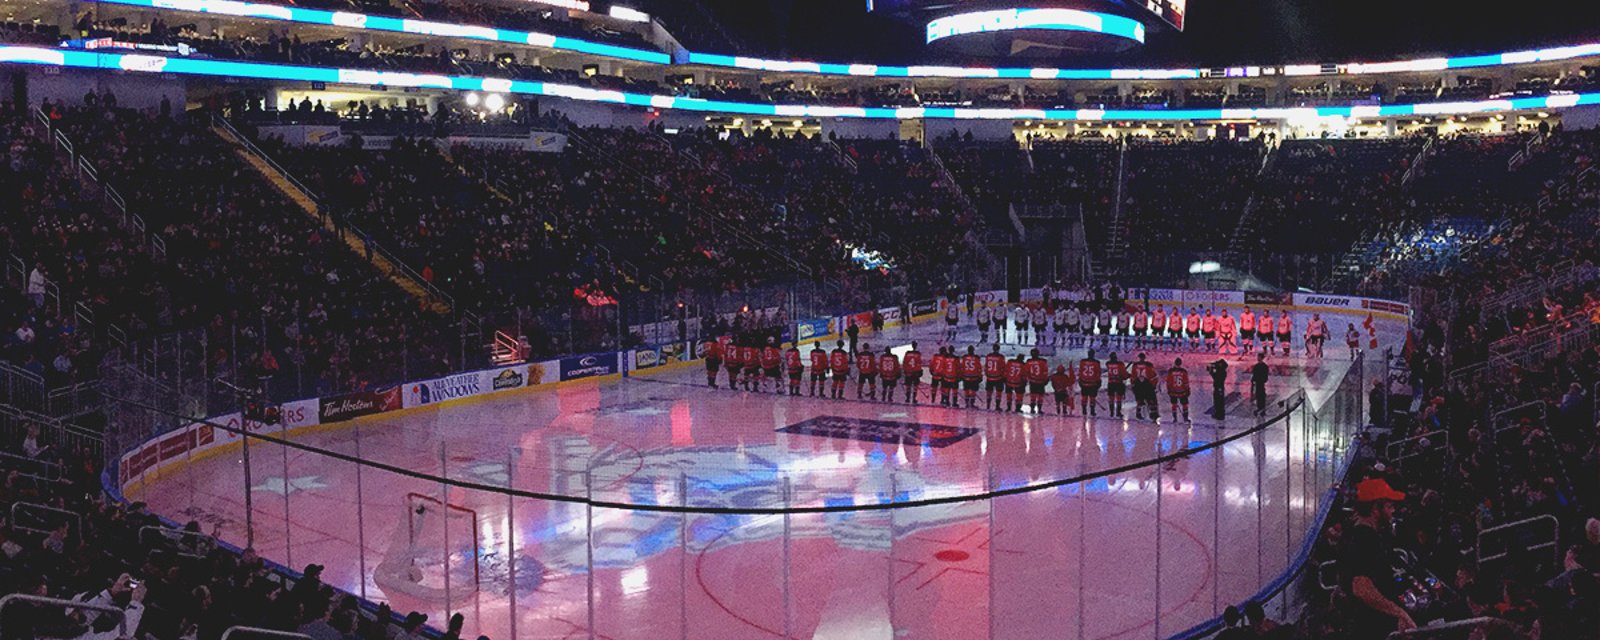 Must see : Touching moment at the CHL top prospects game in Québec last night.